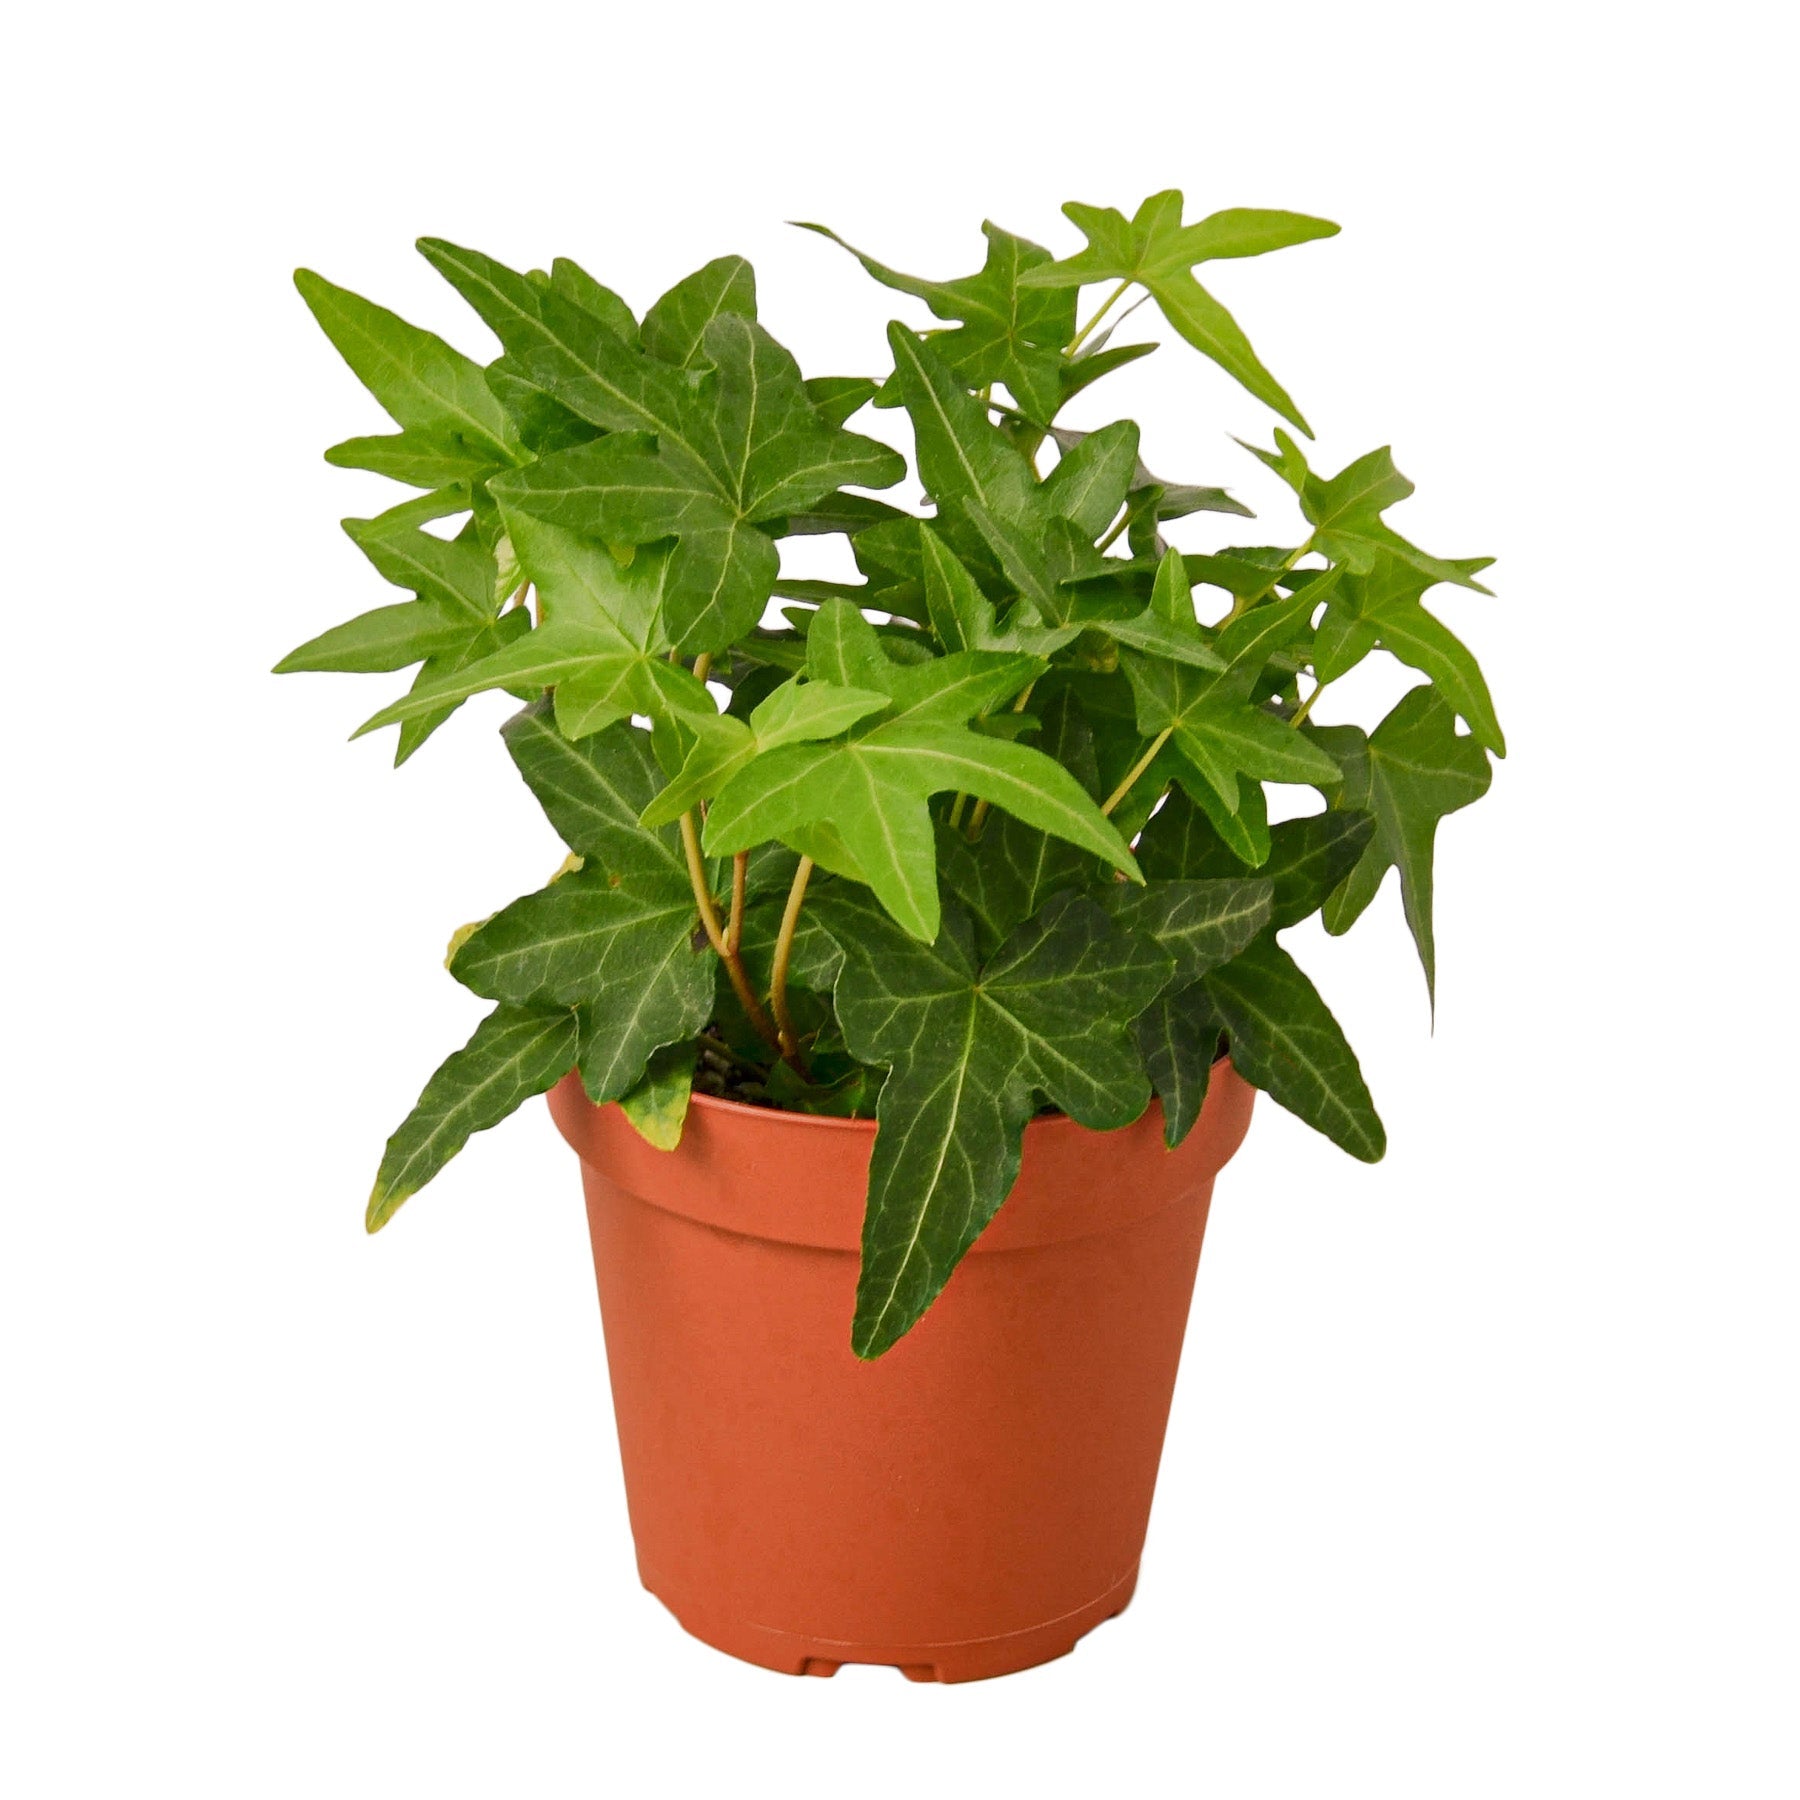 A plant in a pot, set against a clean white background.